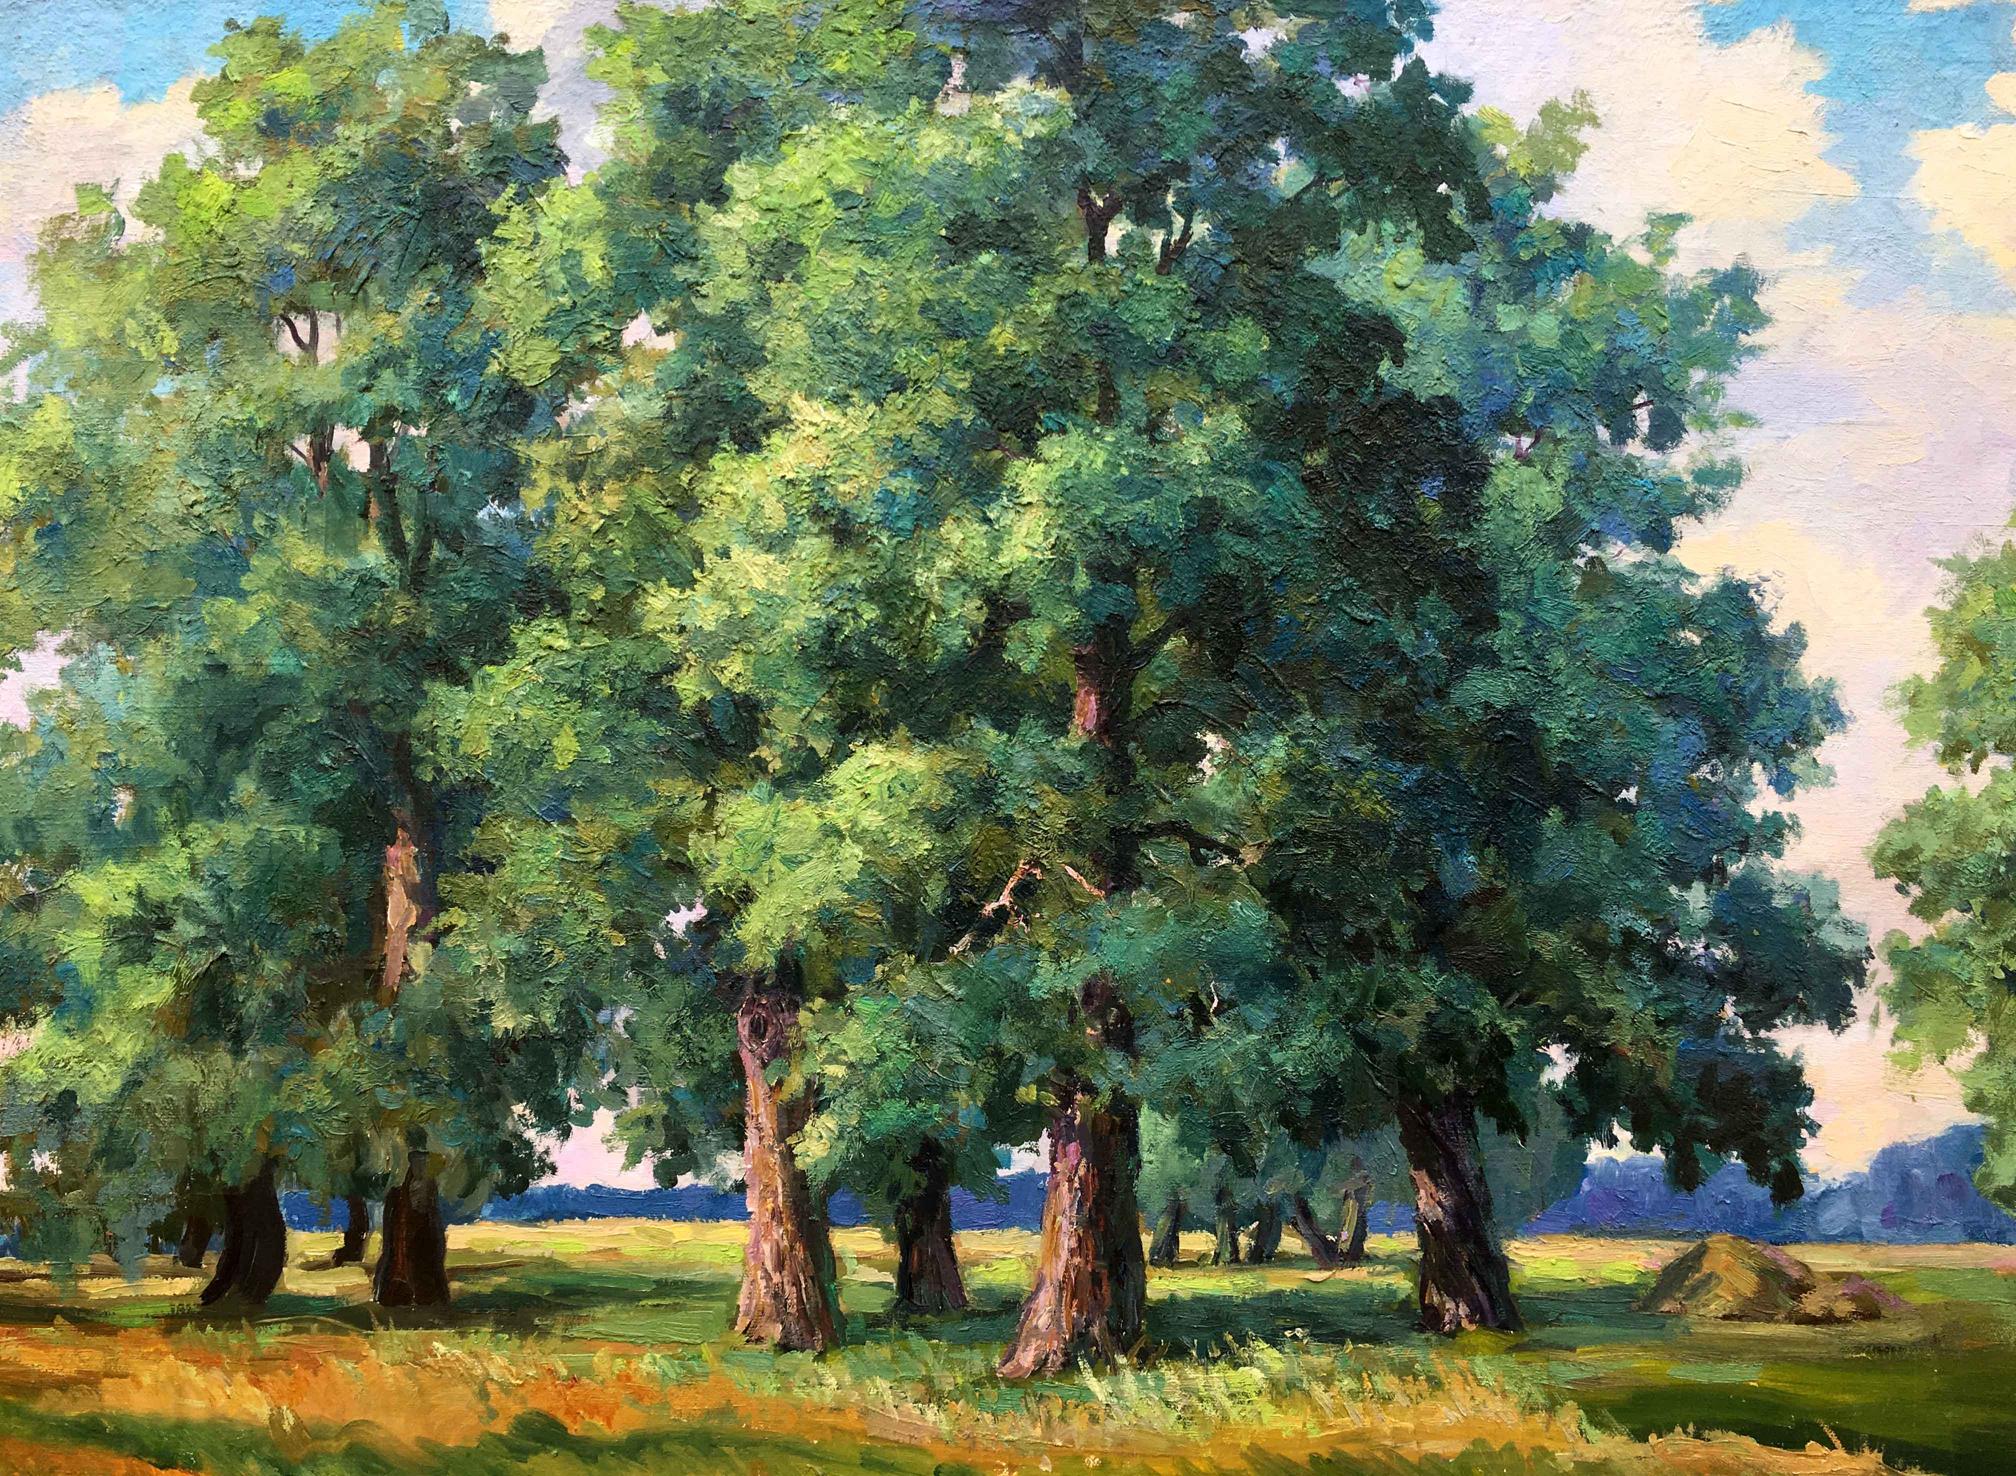 Oil painting forest landscape Nepiypivo Vasily Ignatievich